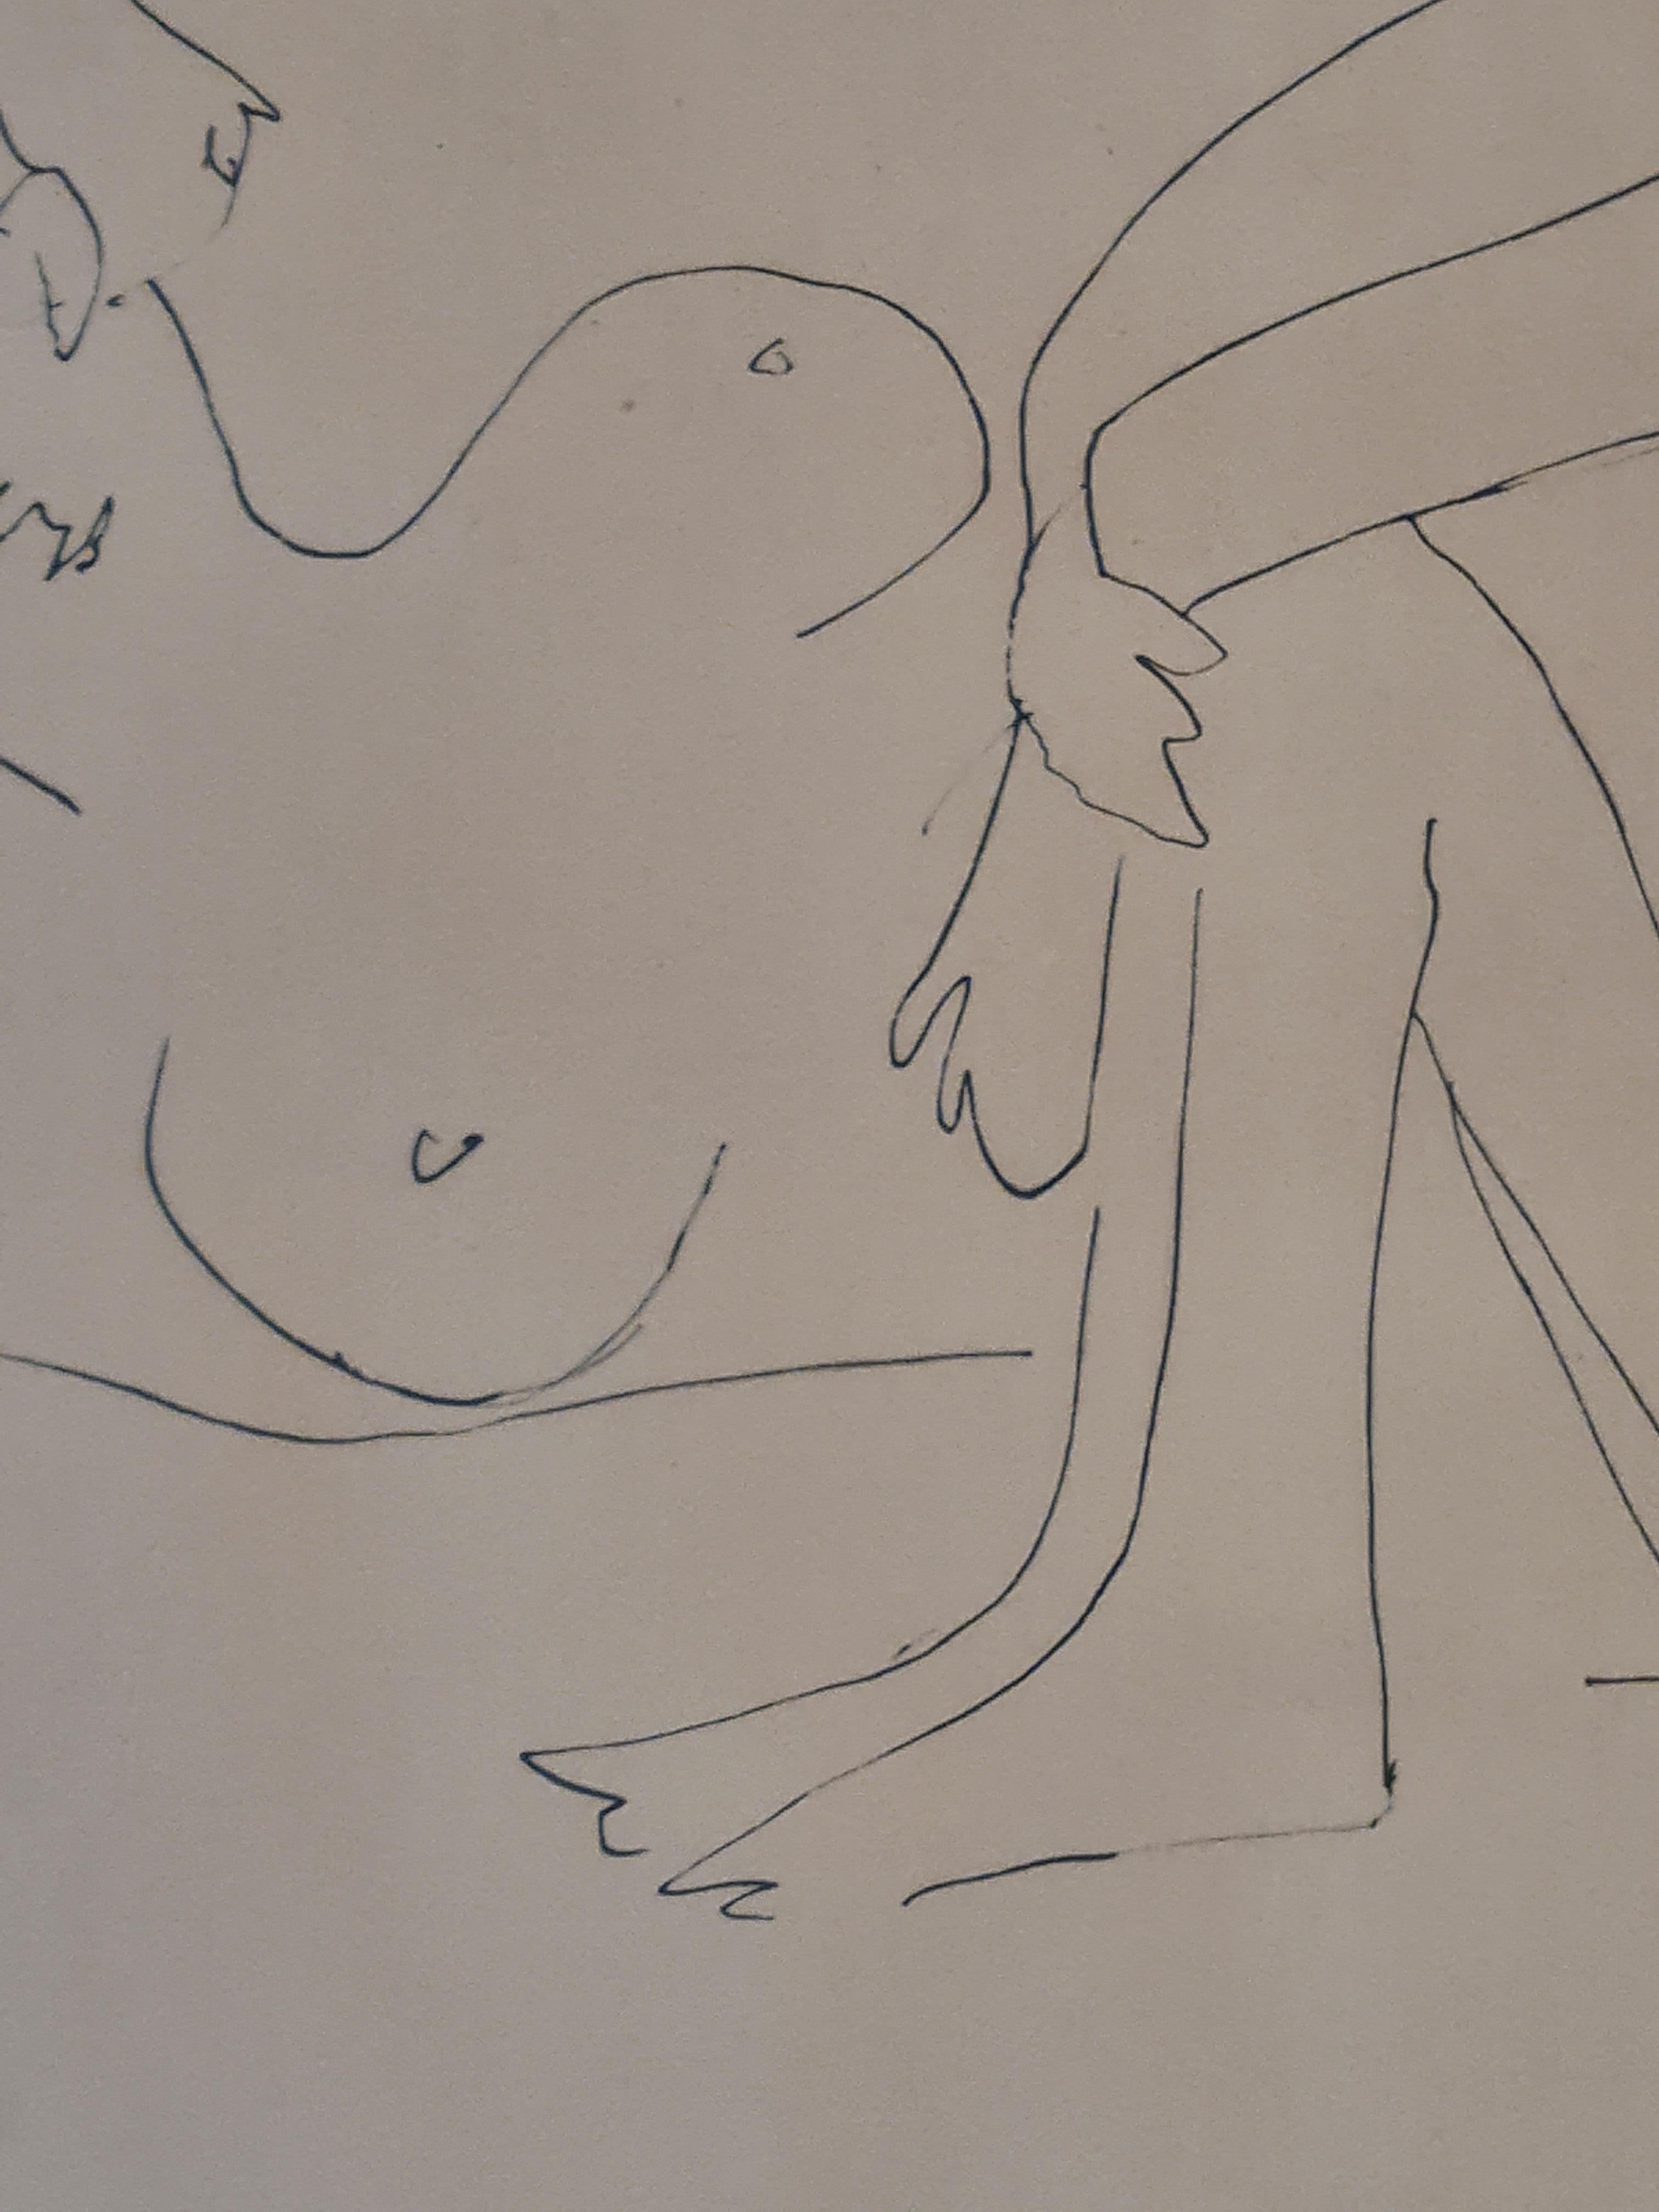 Le Repos IV, Signed/Dated Picasso 8 Mai 47 'dans la planche'. Numbered in Pencil - Modern Print by (after) Pablo Picasso